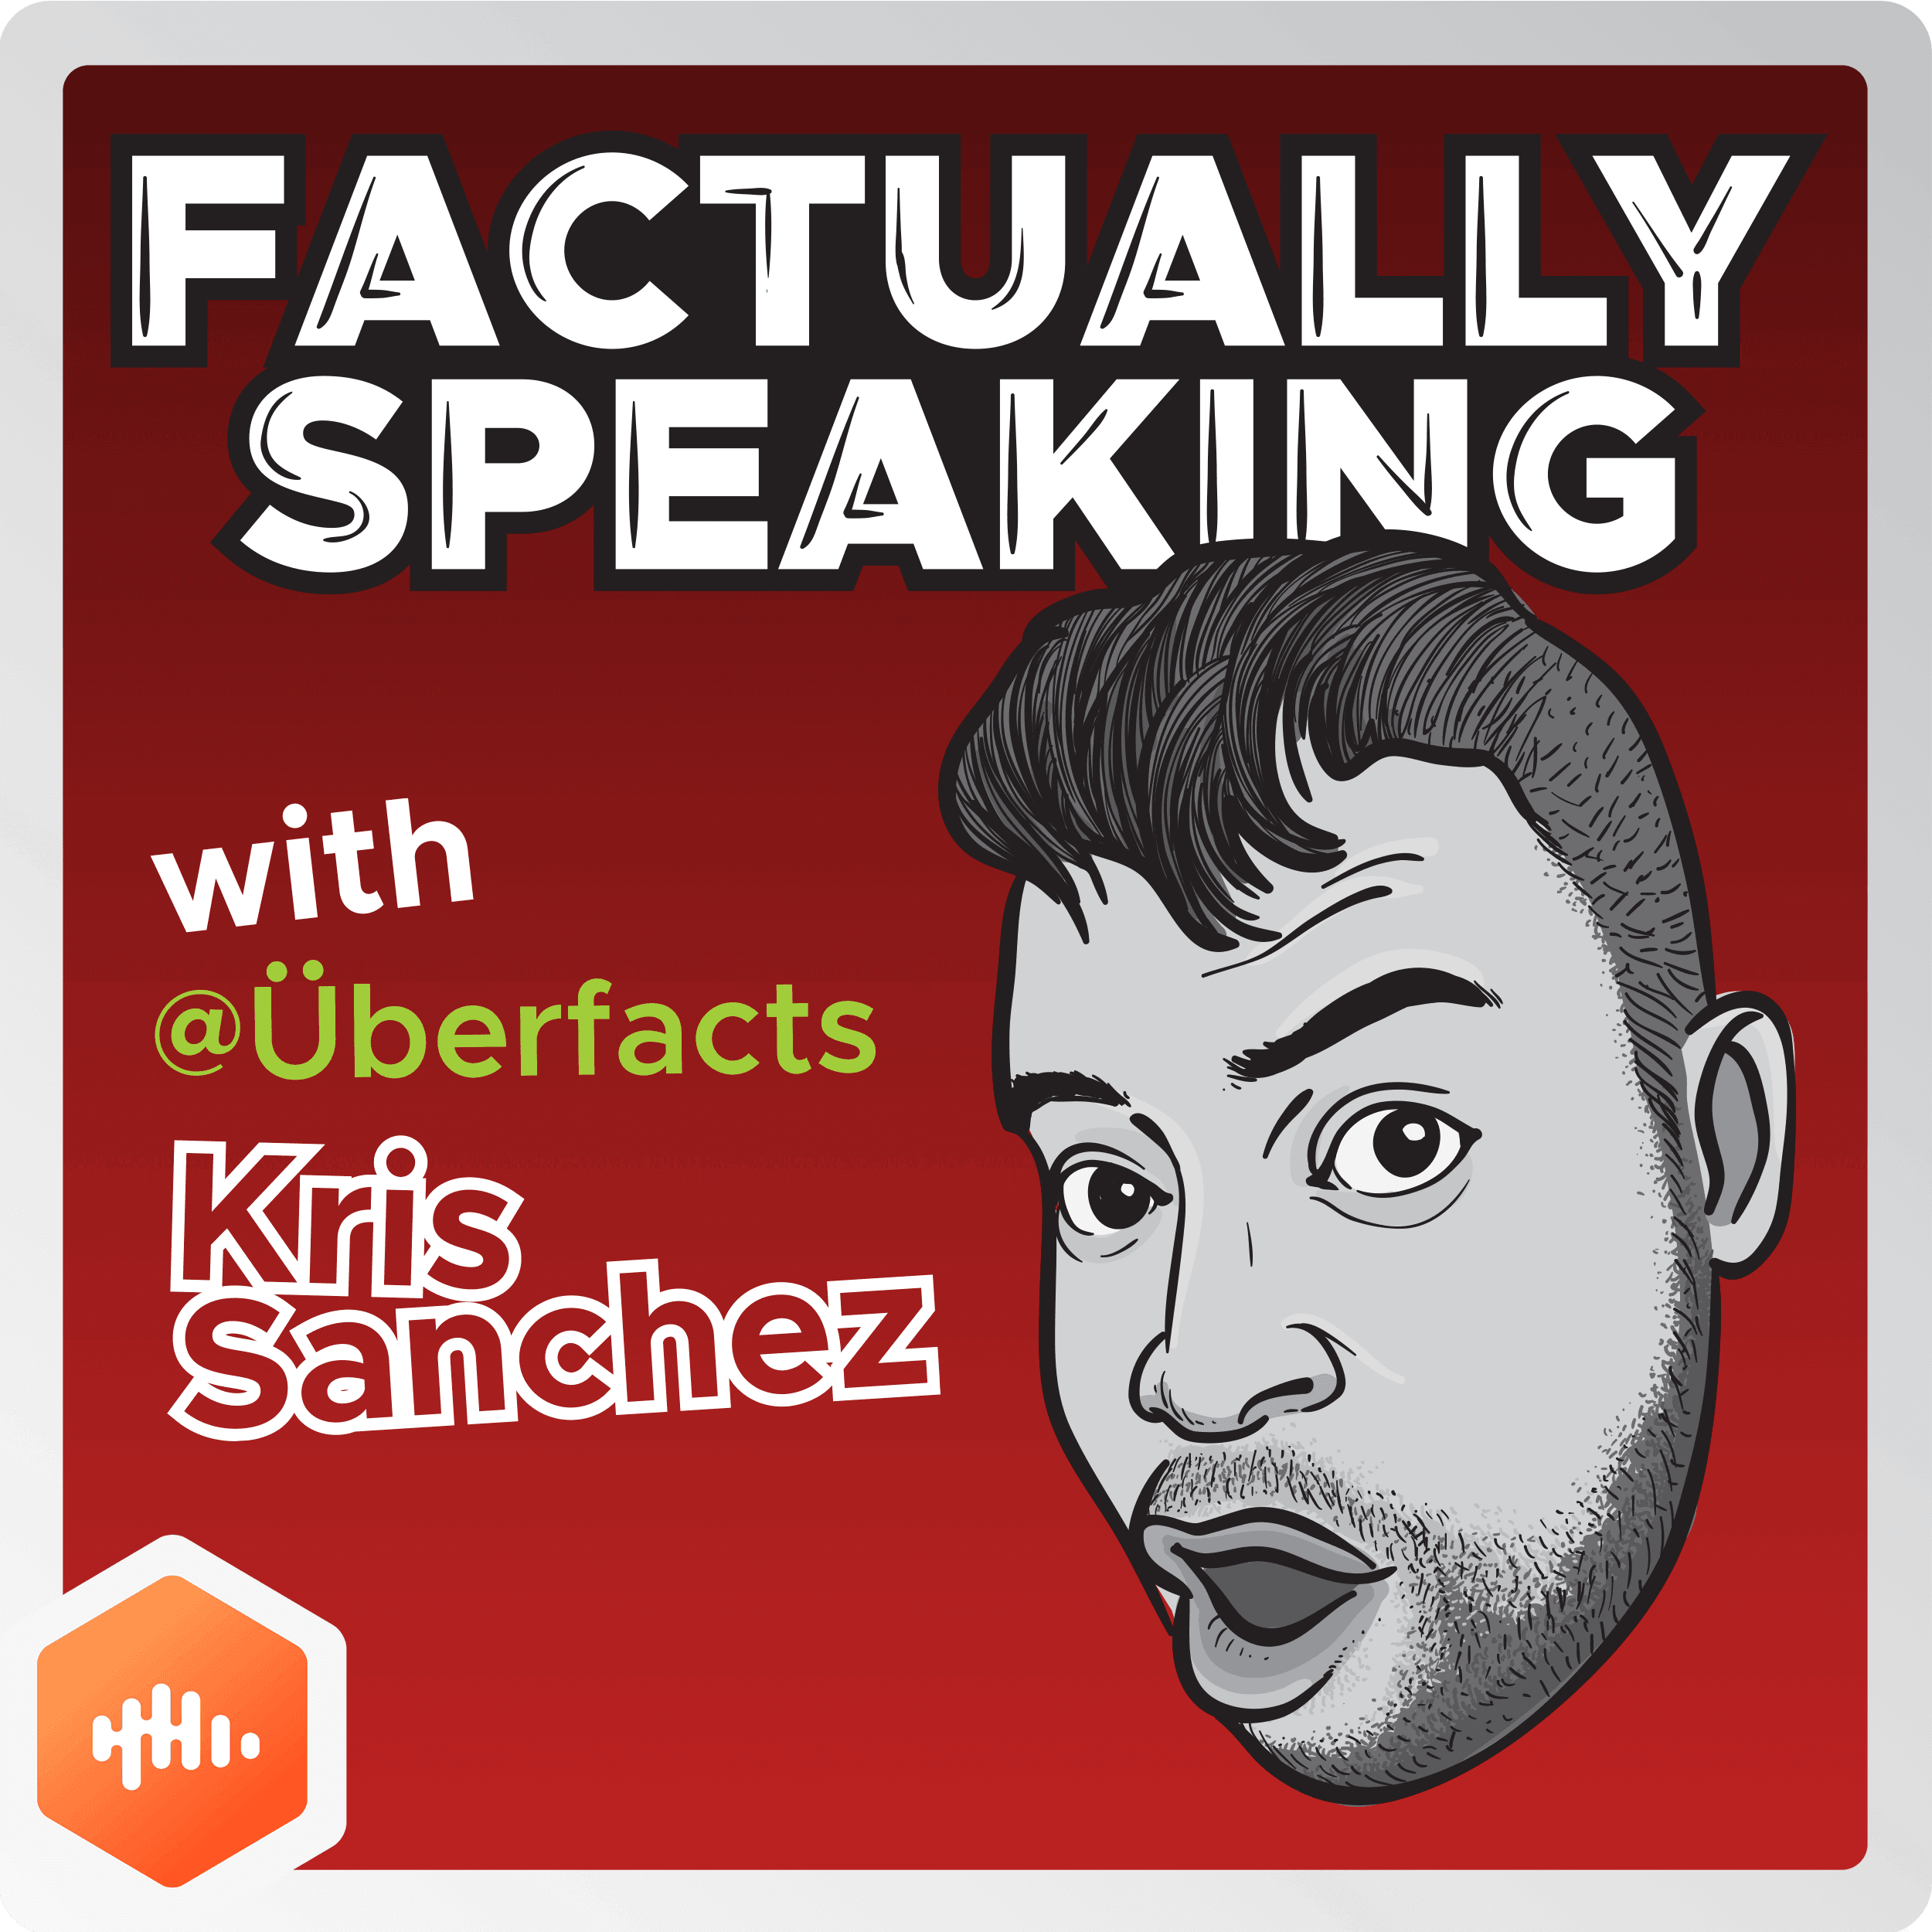 Factually Speaking with Kris Sanchez (@Uberfacts)